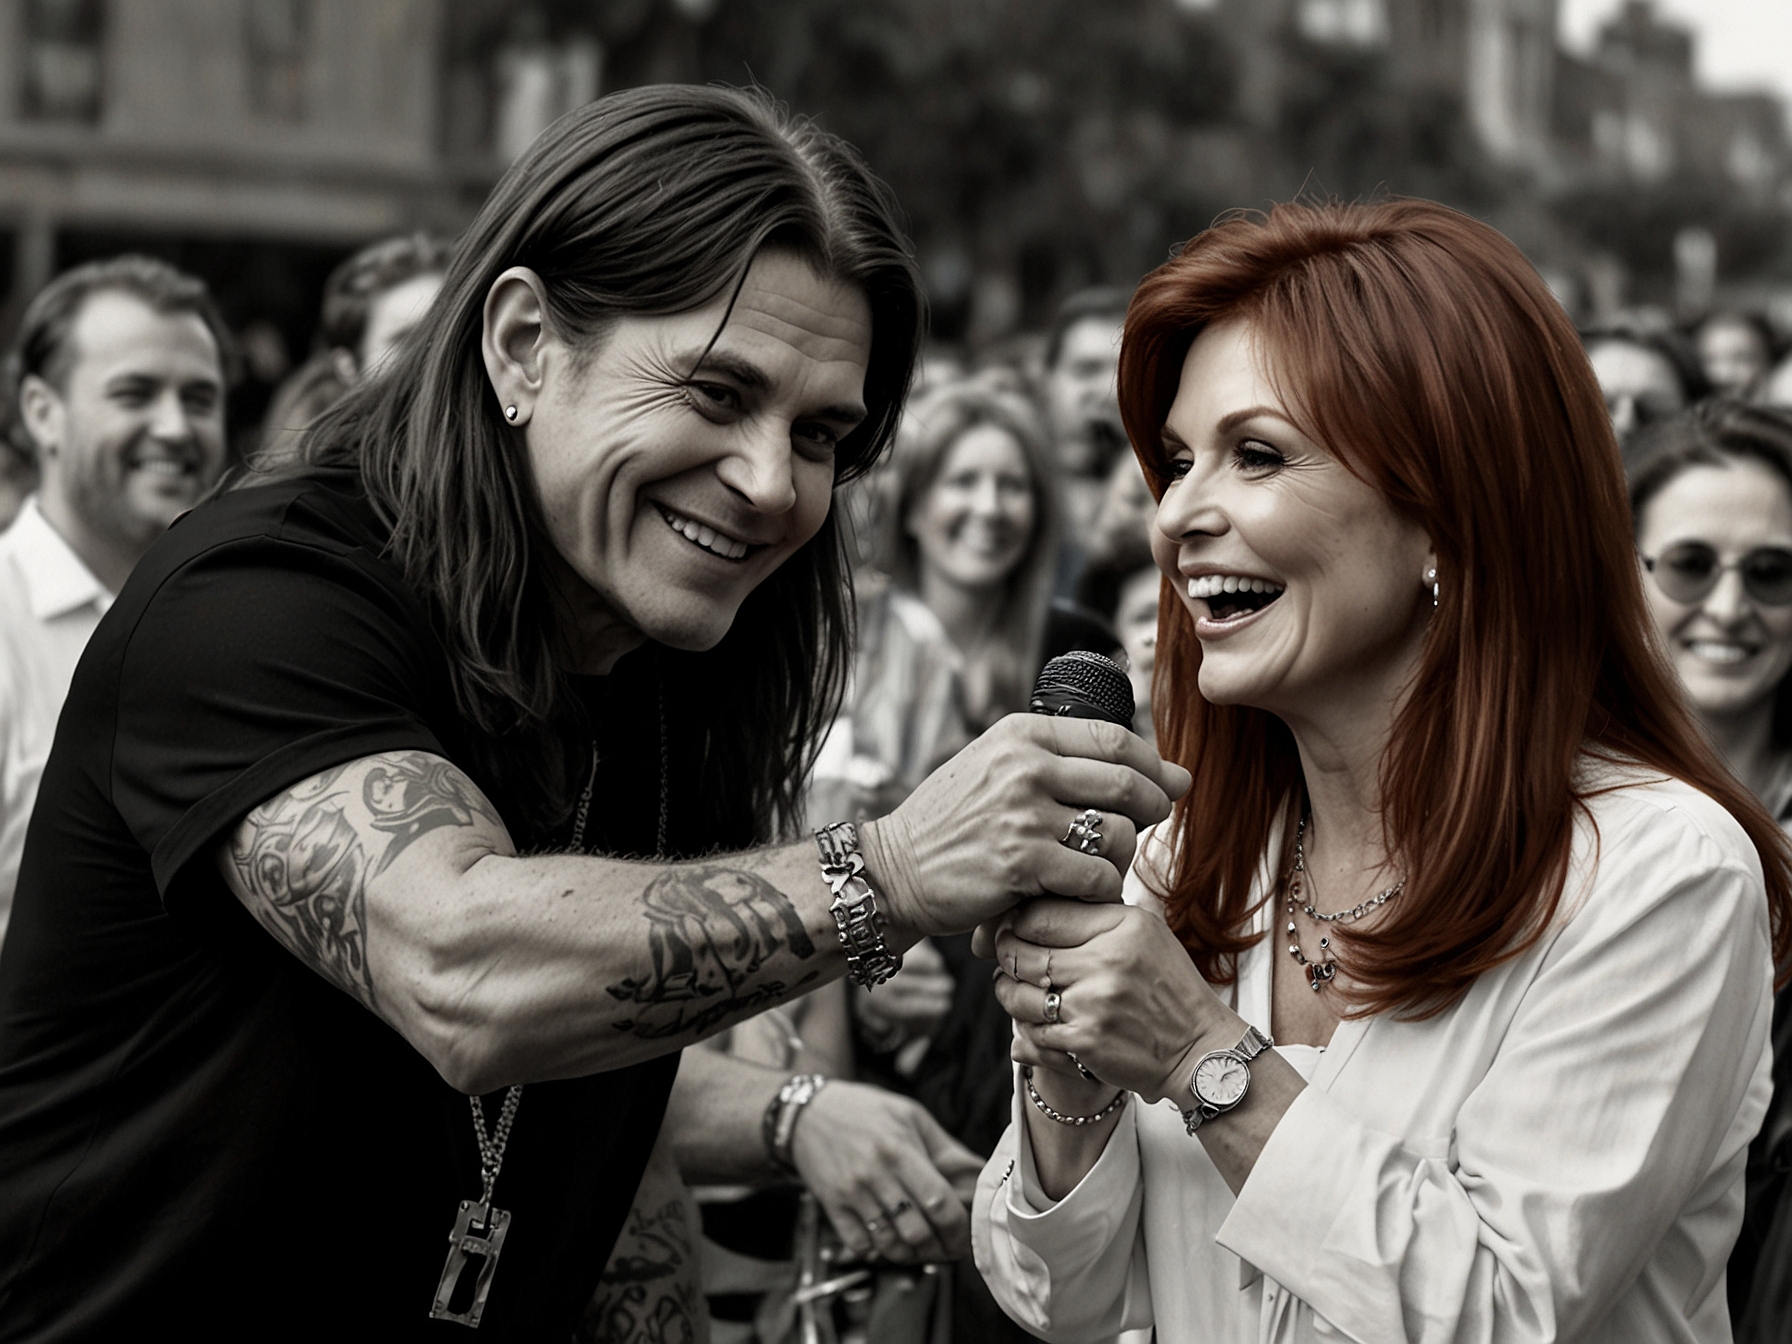 Ozzy Osbourne and Sharon Osbourne at a public event, smiling and engaging with fans. This image reflects the couple's close relationship and Sharon's supportive role in managing Ozzy's health.